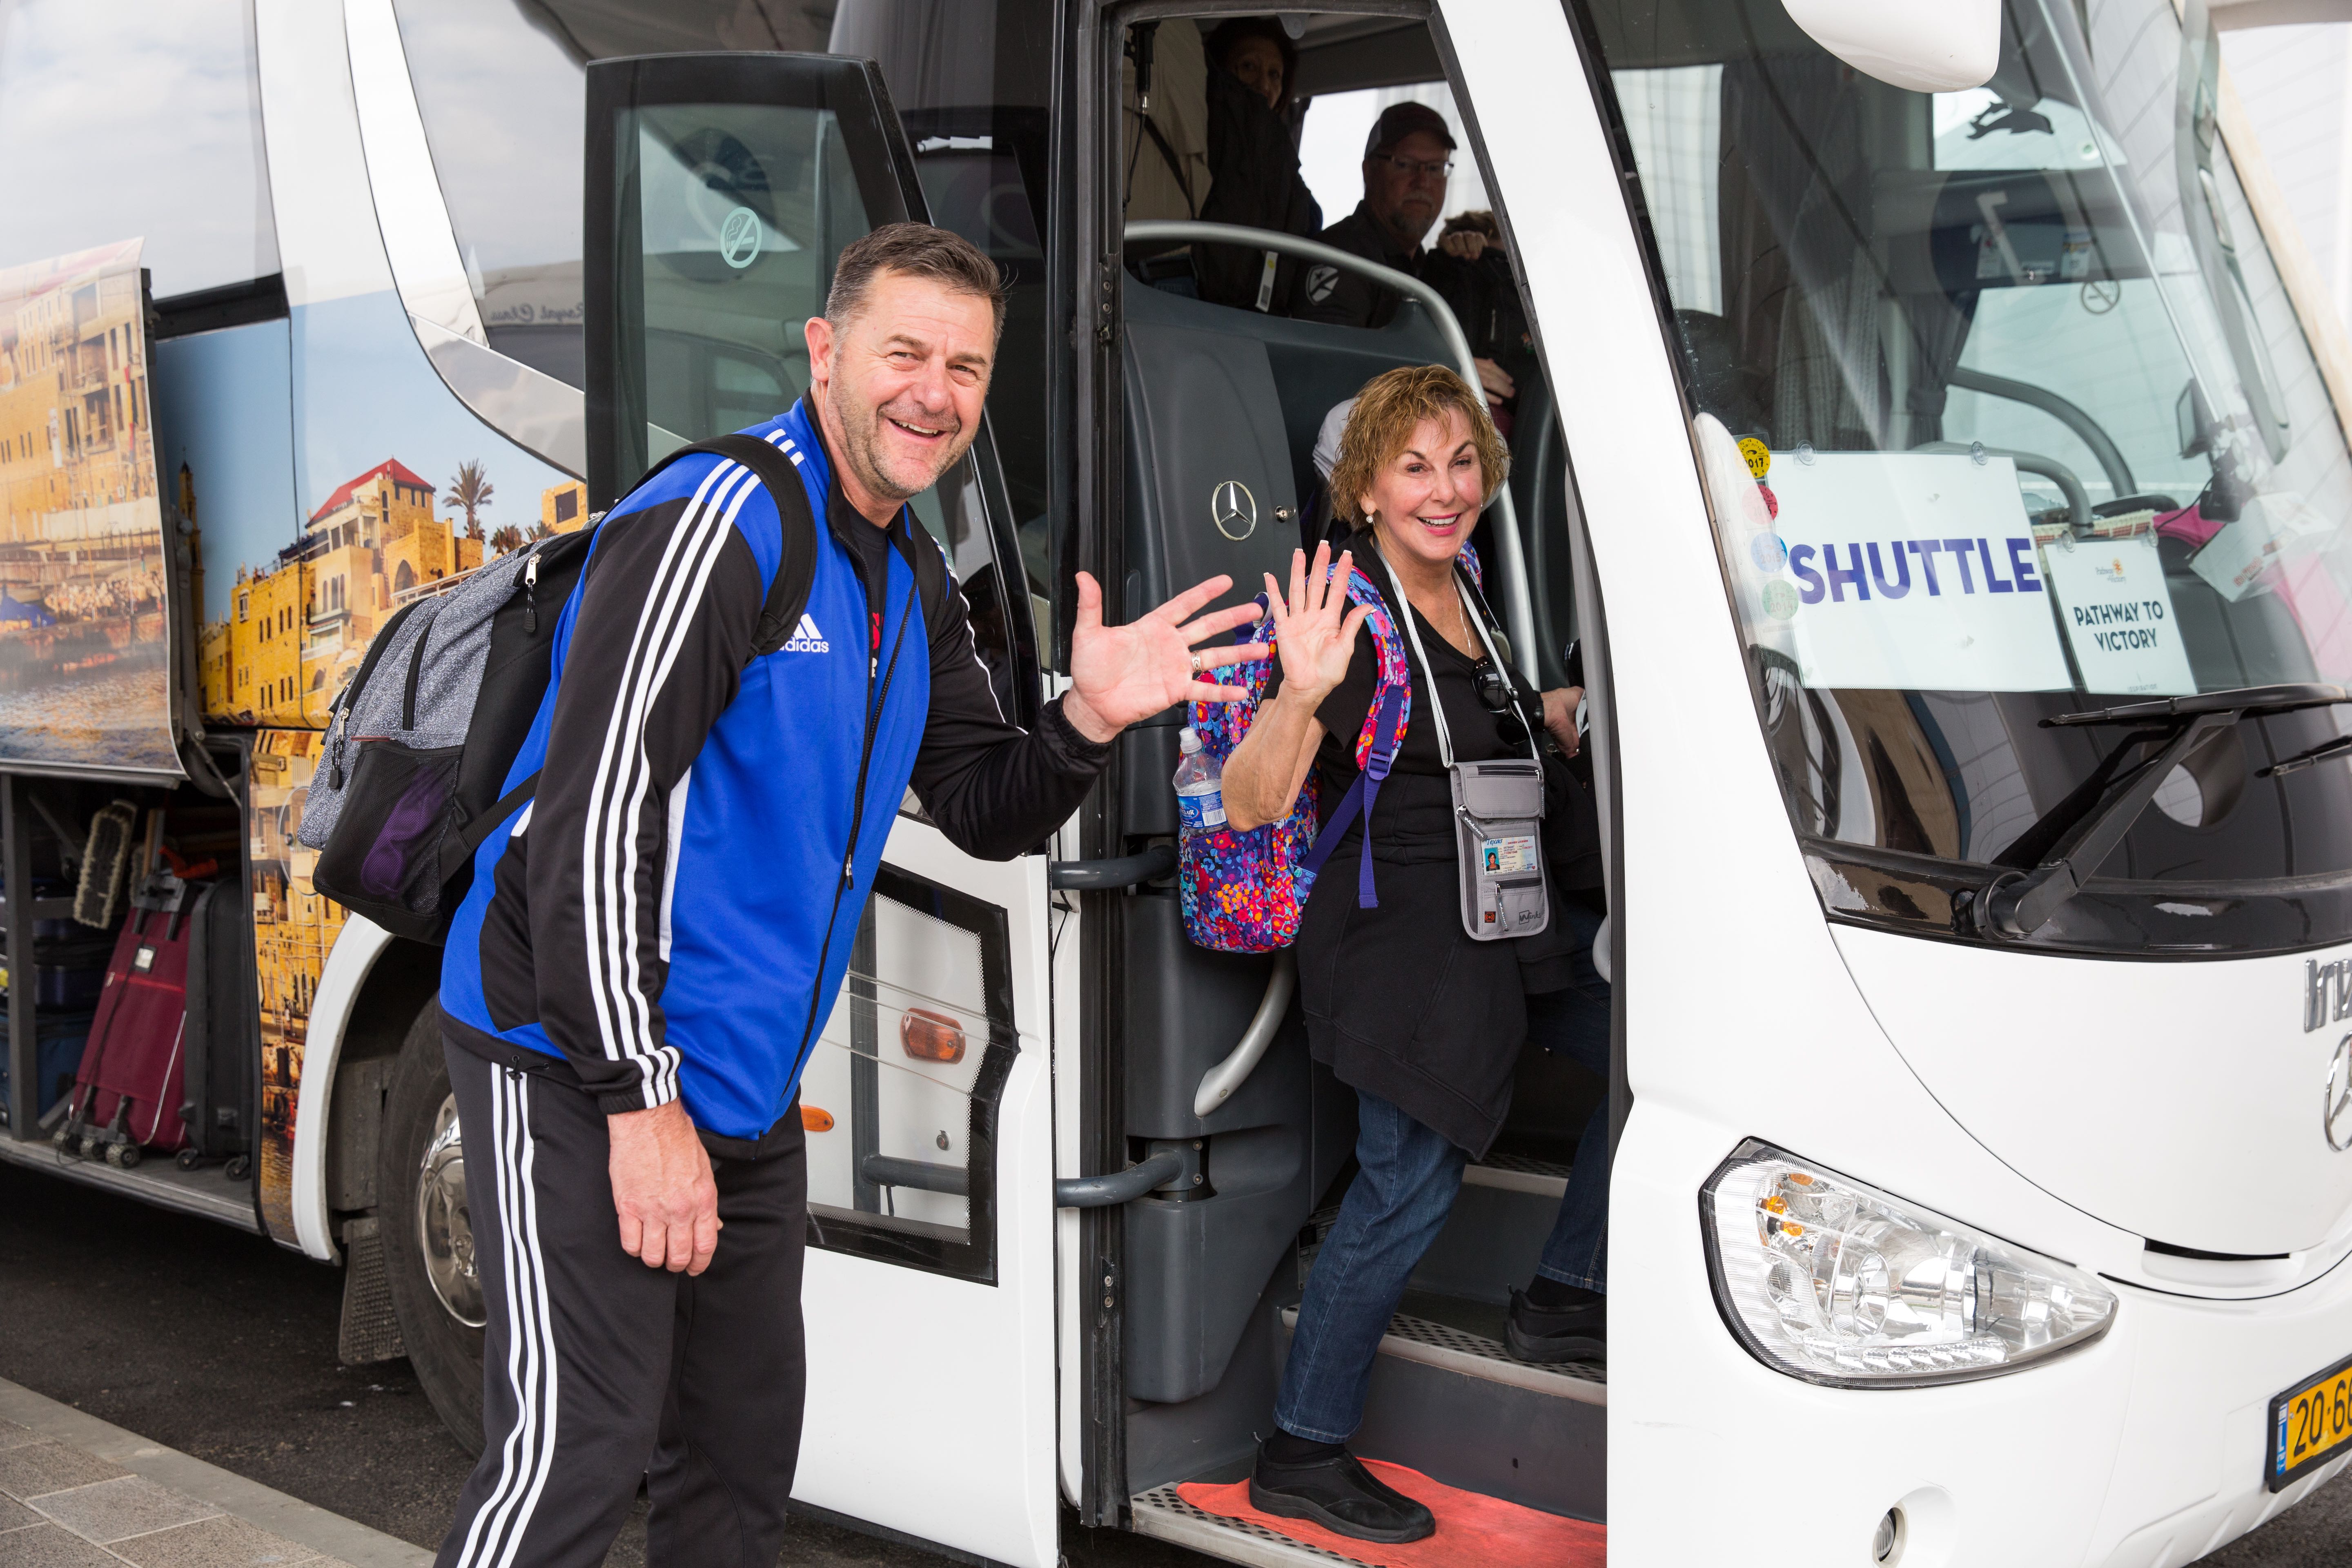 A couple of Israel travelers wave as they enter the airport shuttle bus